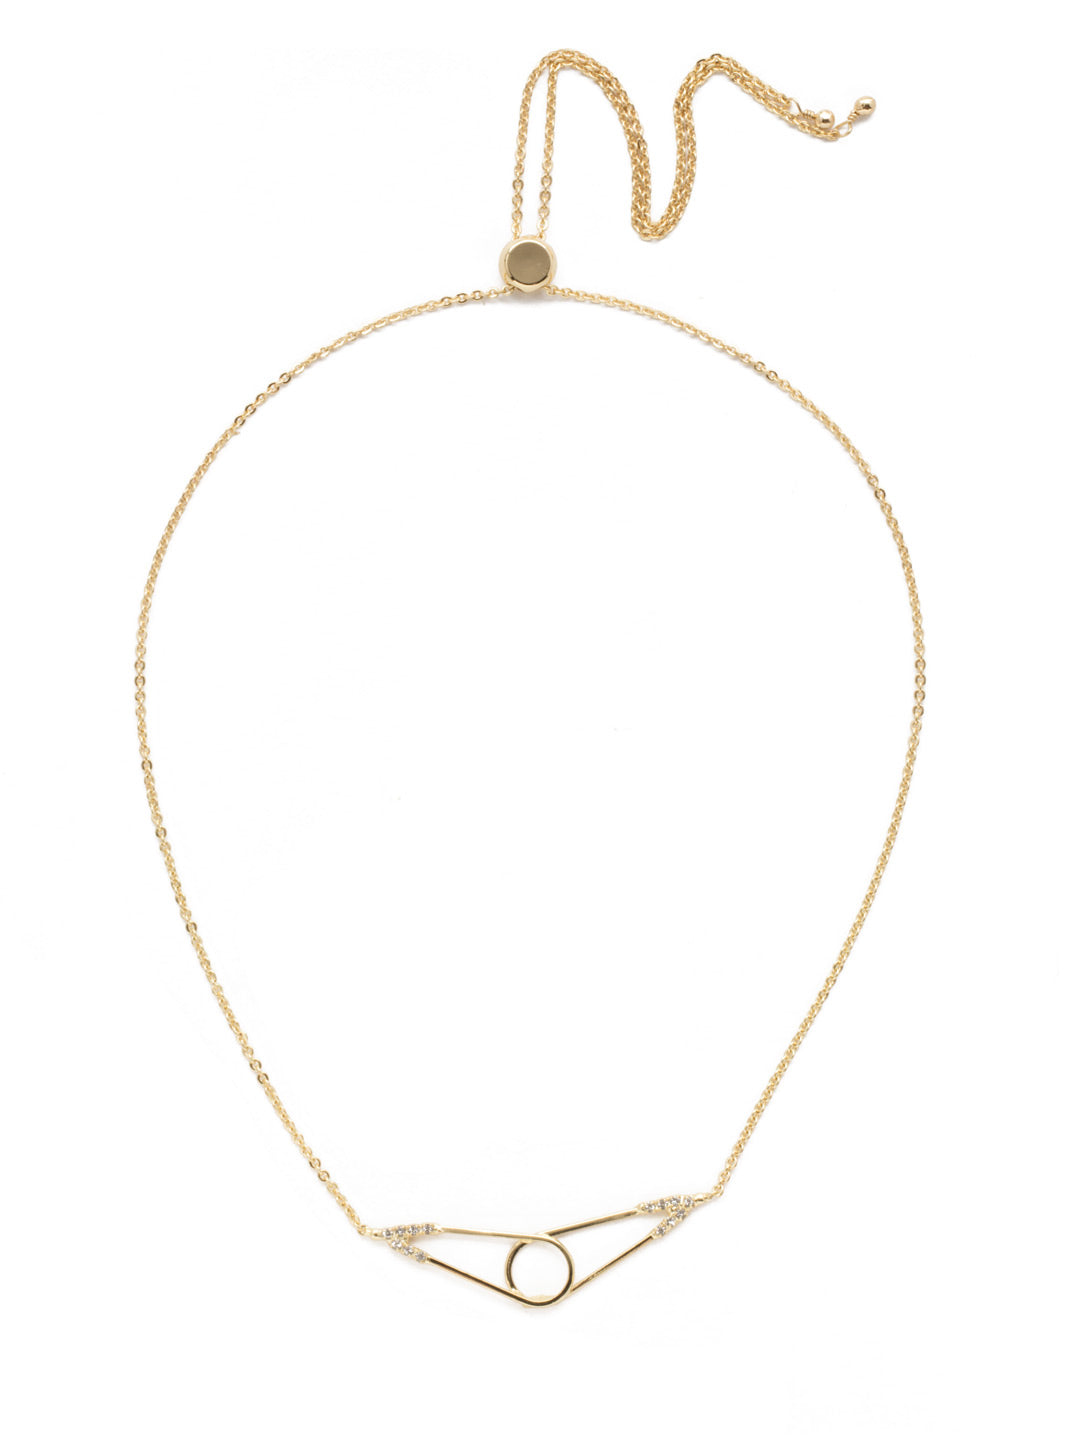 Discerning Eye Crystal Pendant Necklace - 4NEK29BGCRY - <p>Love a piece with unique metalwork? Here it is! It sparkles just enough with crystal edging to make it a showstopper. From Sorrelli's Crystal collection in our Bright Gold-tone finish.</p>